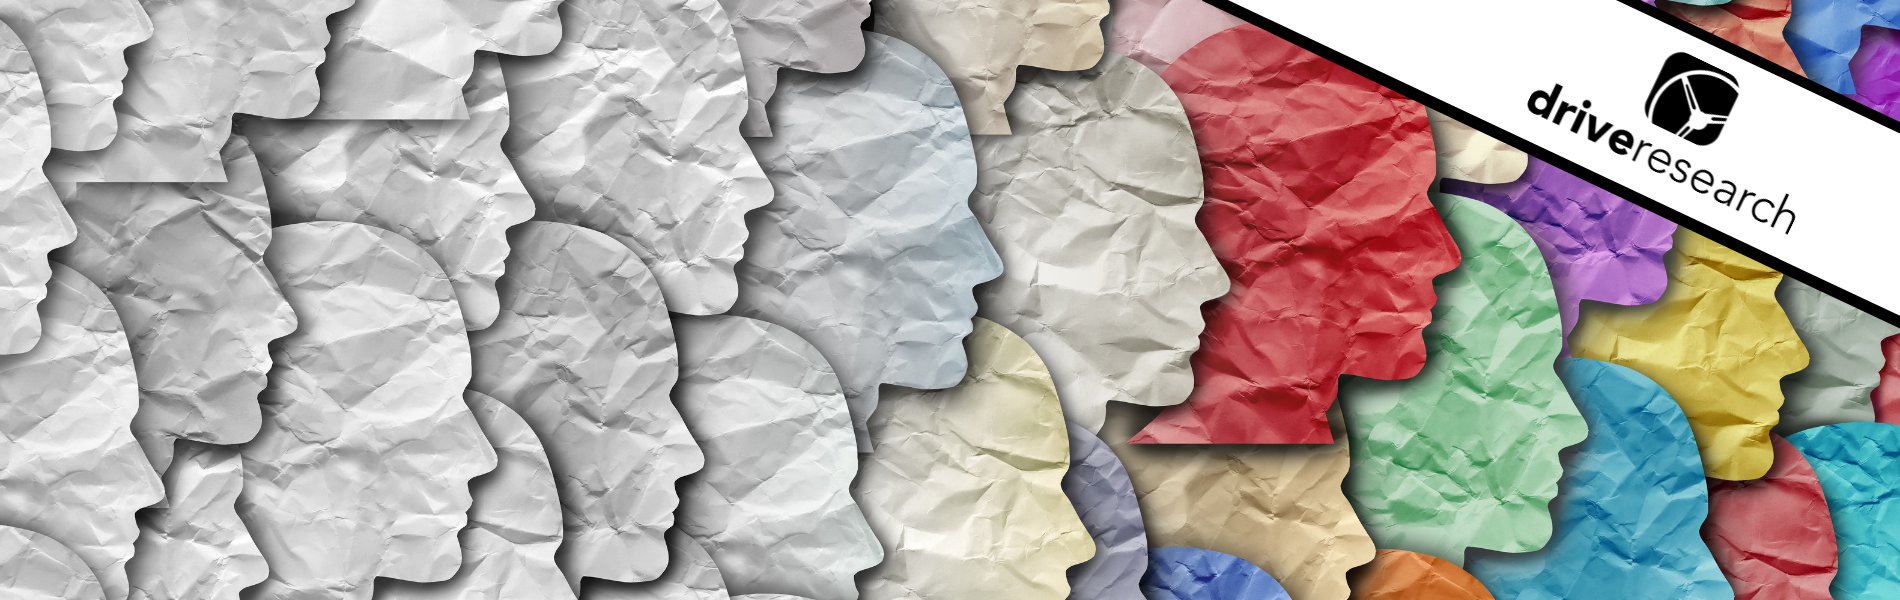 white paper heads that fade into colored papered heads